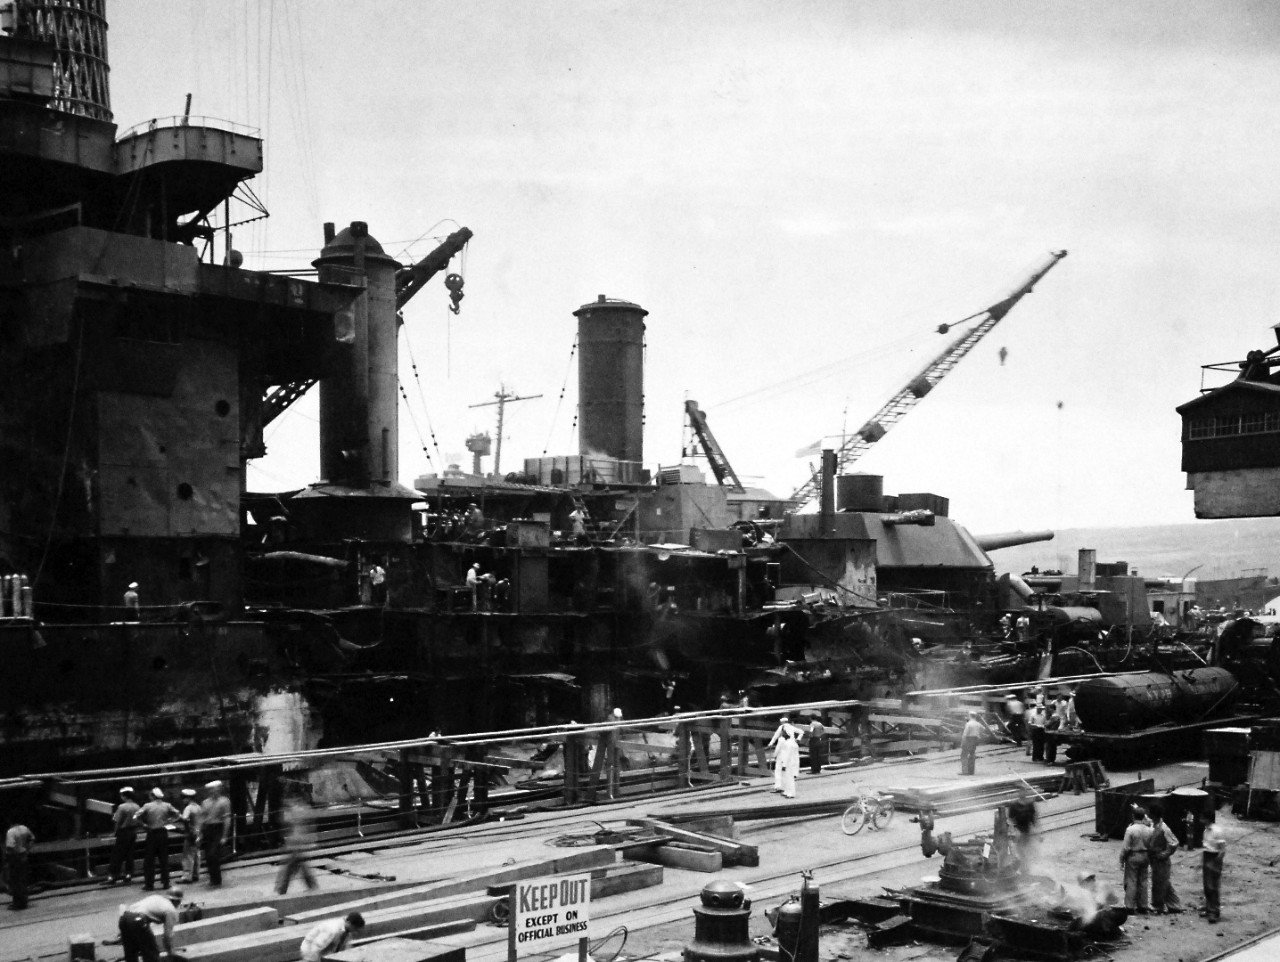 80-G-41614:  Pearl Harbor Attack, December 7, 1941USS West Virginia (BB 48) severely damaged in the Japanese Attack of December 7, 1941.  Shown:  Damage to her side is visible.  Photograph released May 23, 1943.  Official U.S. Navy Photograph, now in the collections of the National Archives. (2016/10/11).